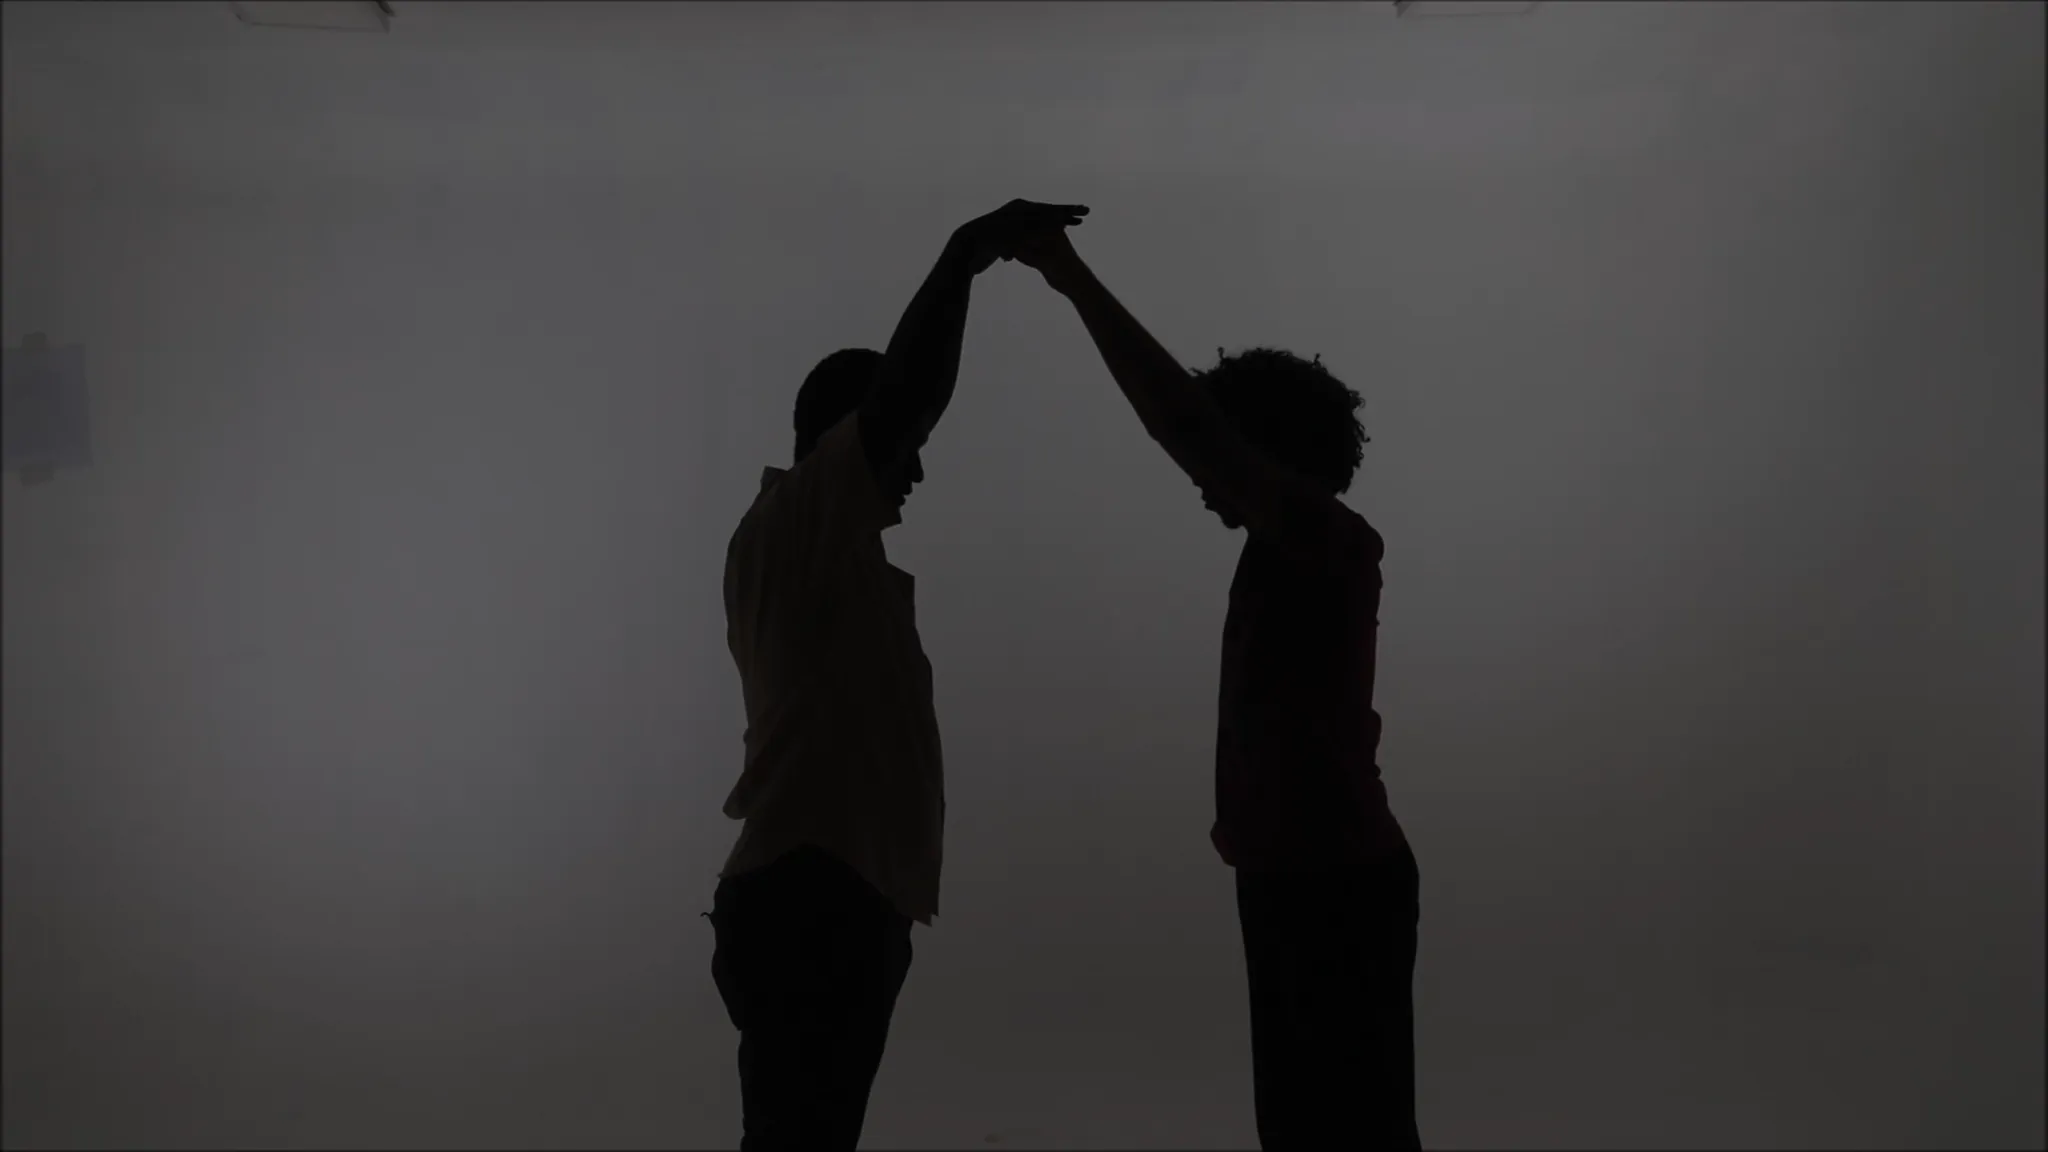 Black shadows of two persons holding hands together, arms up